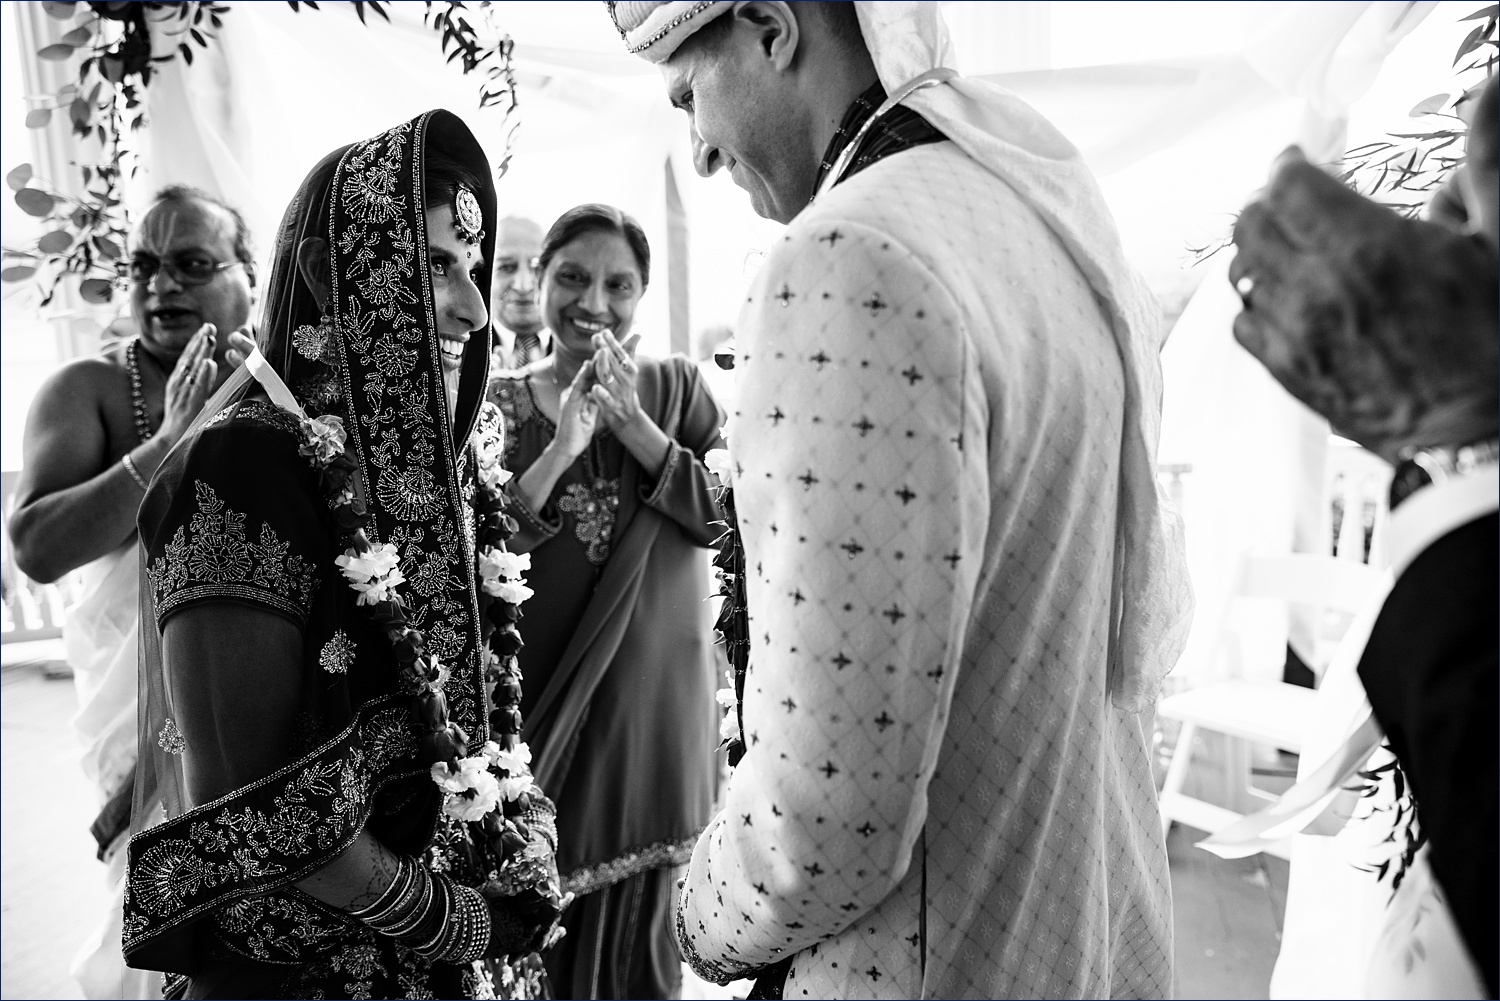 Jai Mala part of the Hindu ceremony with the bride and groom exchanging garland at the wedding ceremony in NH